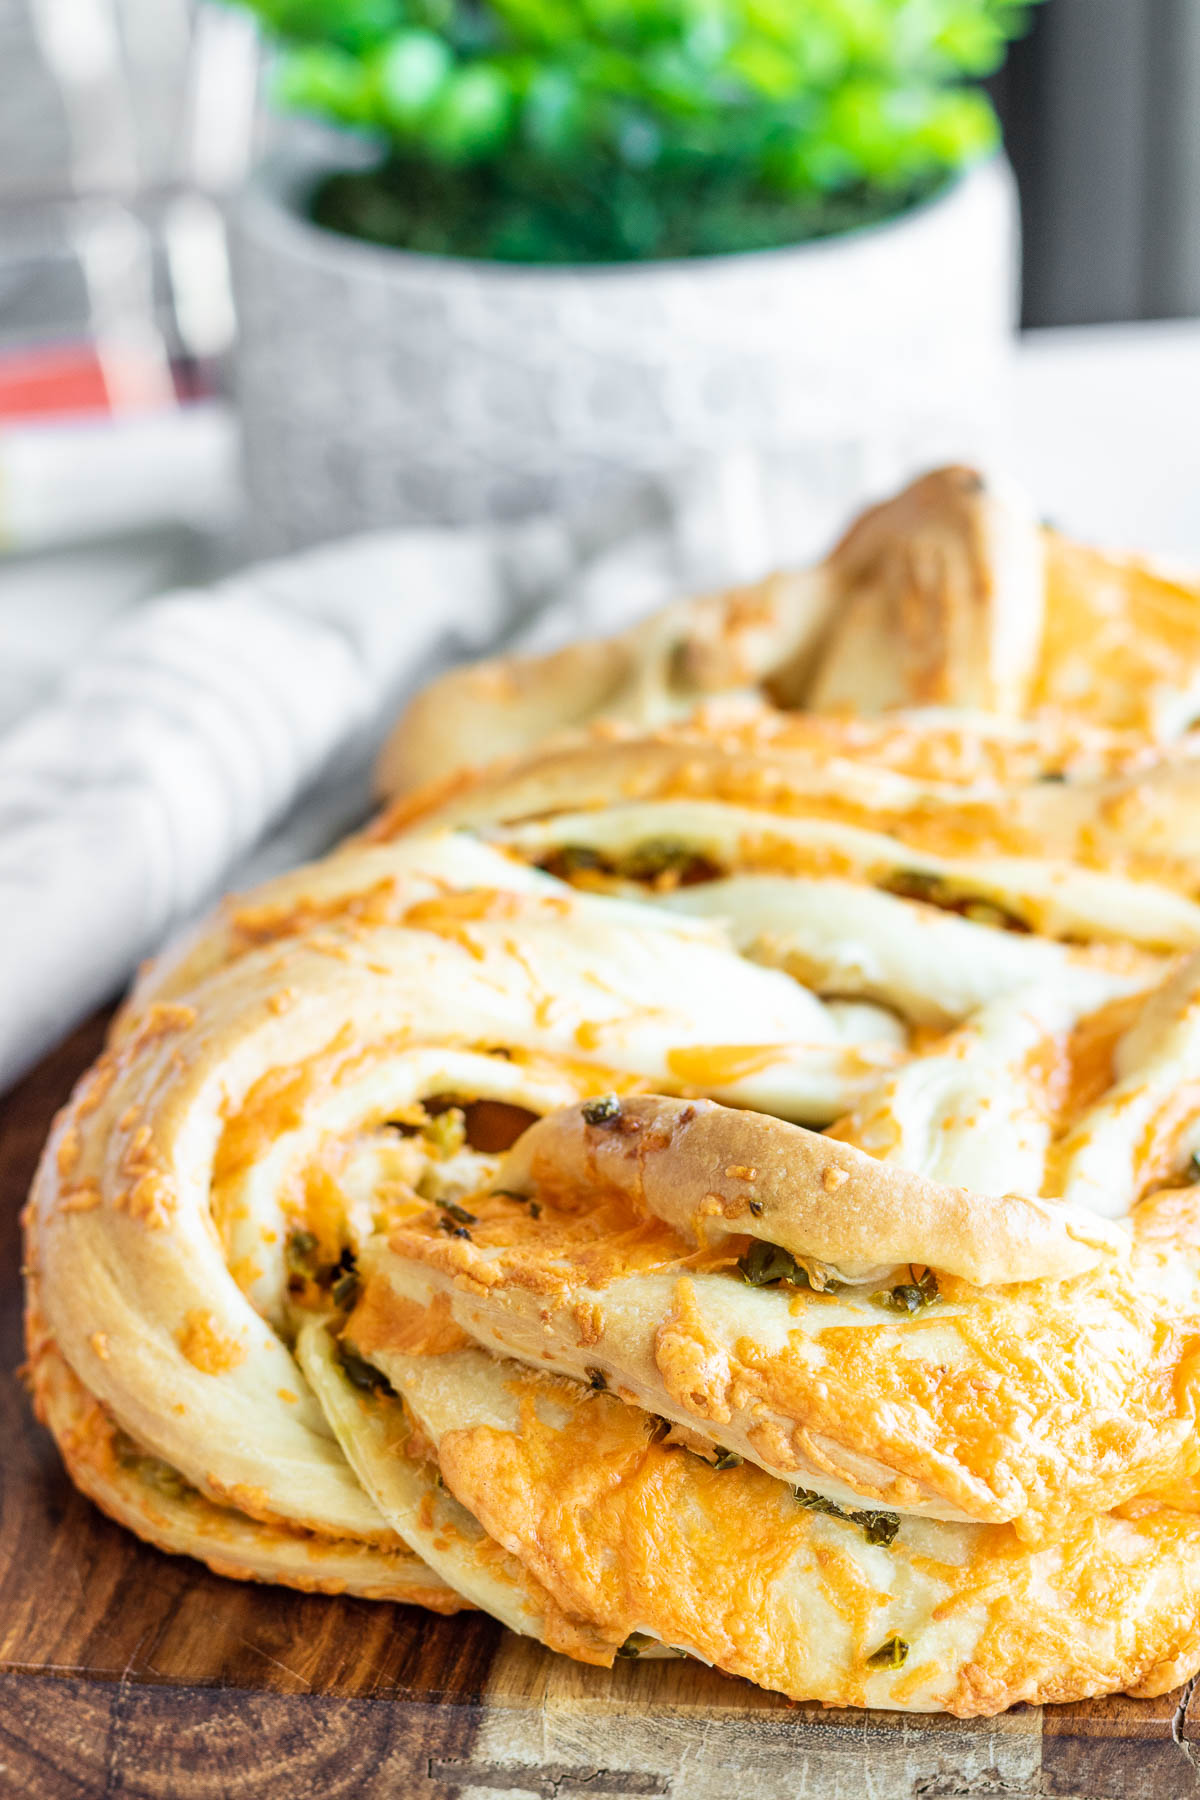 A swirled bread with cheese and jalapeños.